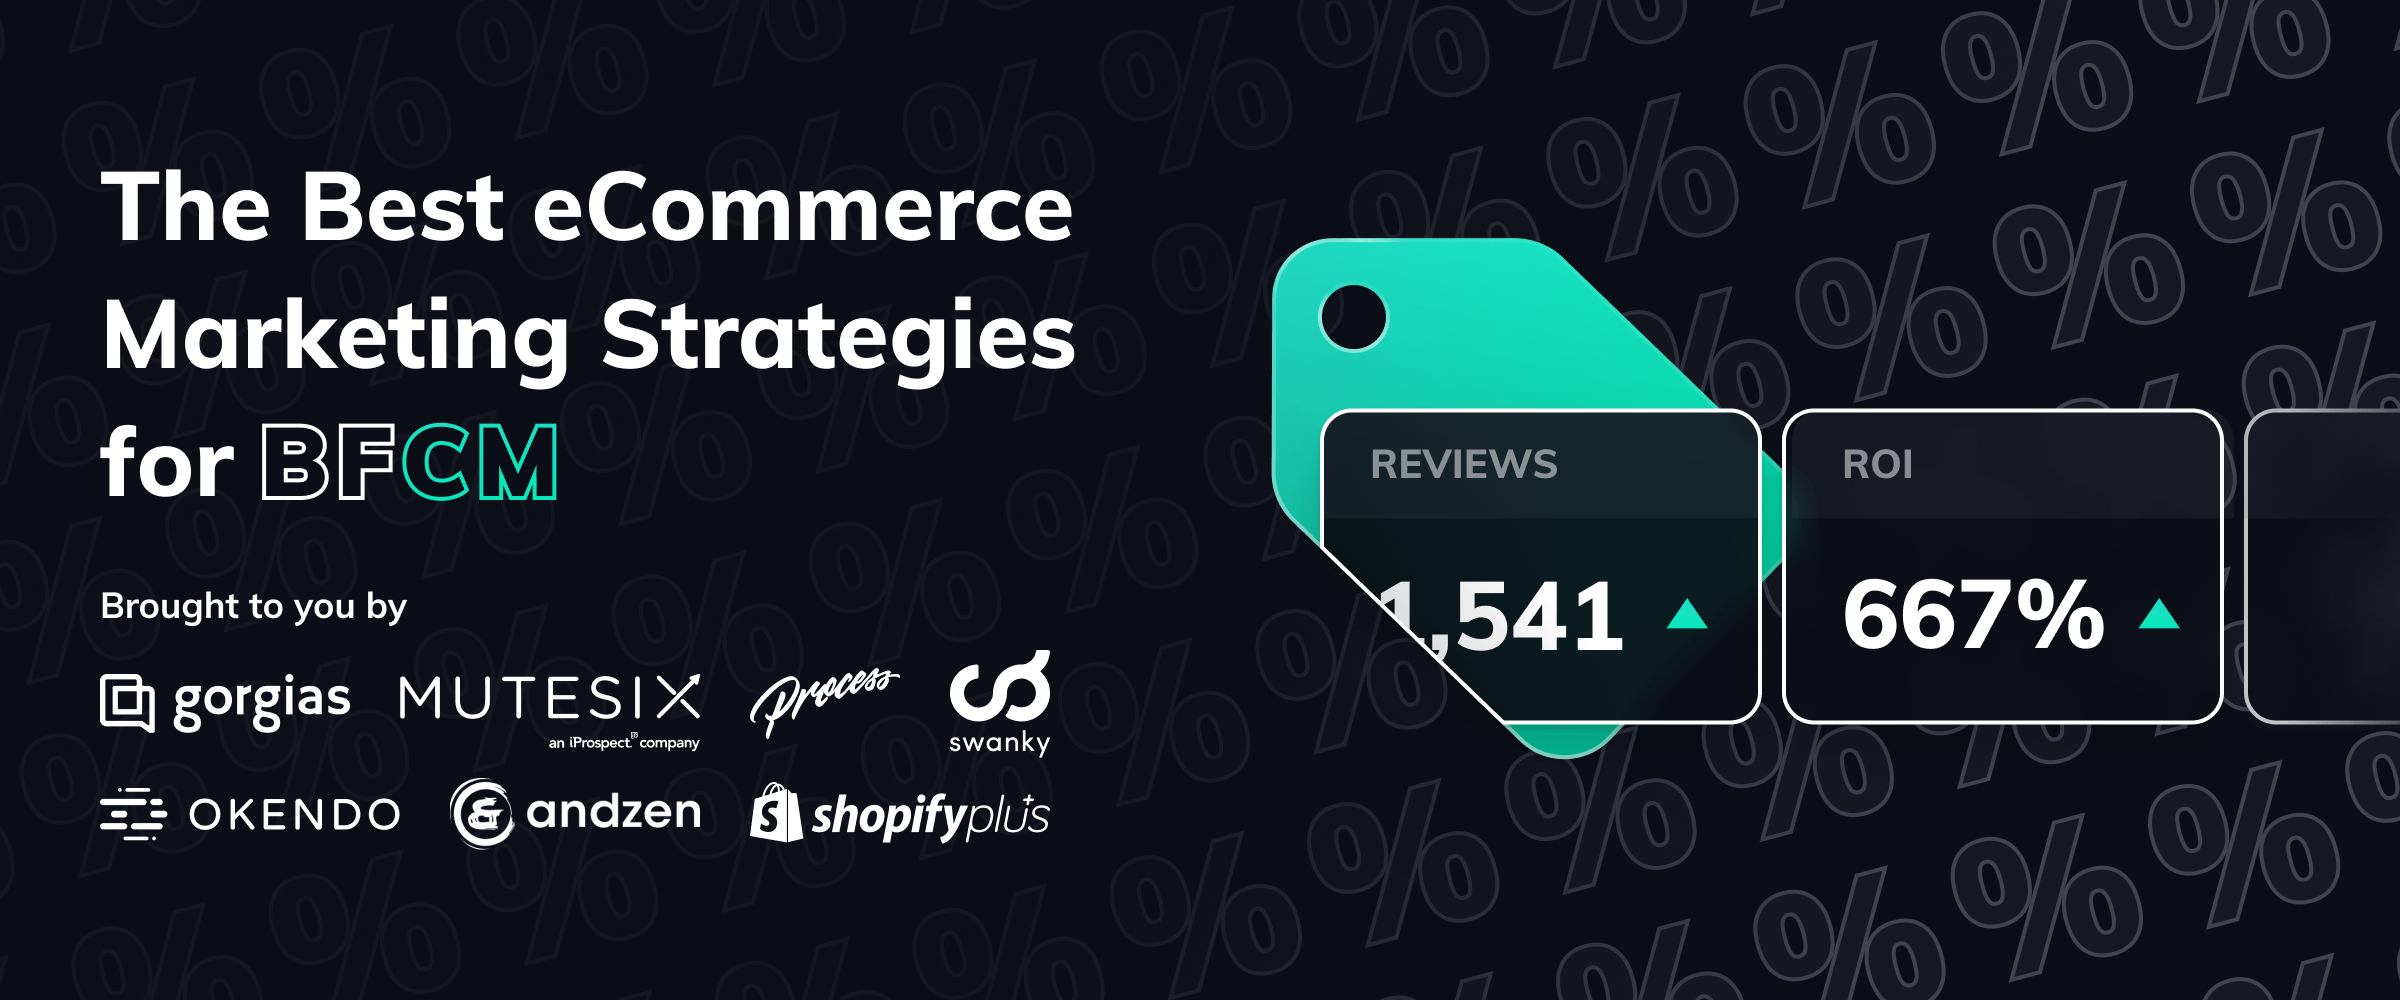 The Best eCommerce Marketing Strategies for BFCM from Shopify Experts